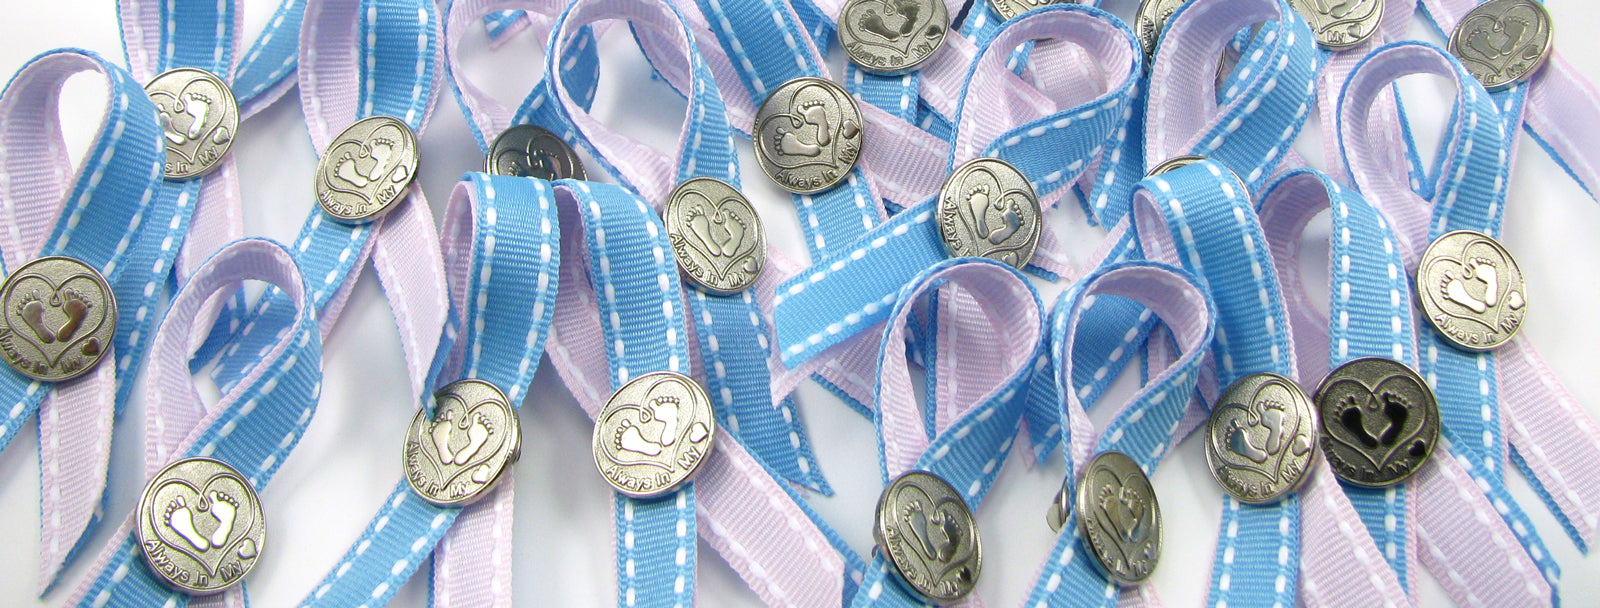 Pregnancy & Infant Loss Awareness Fabric Ribbon Pins- Limited Edition